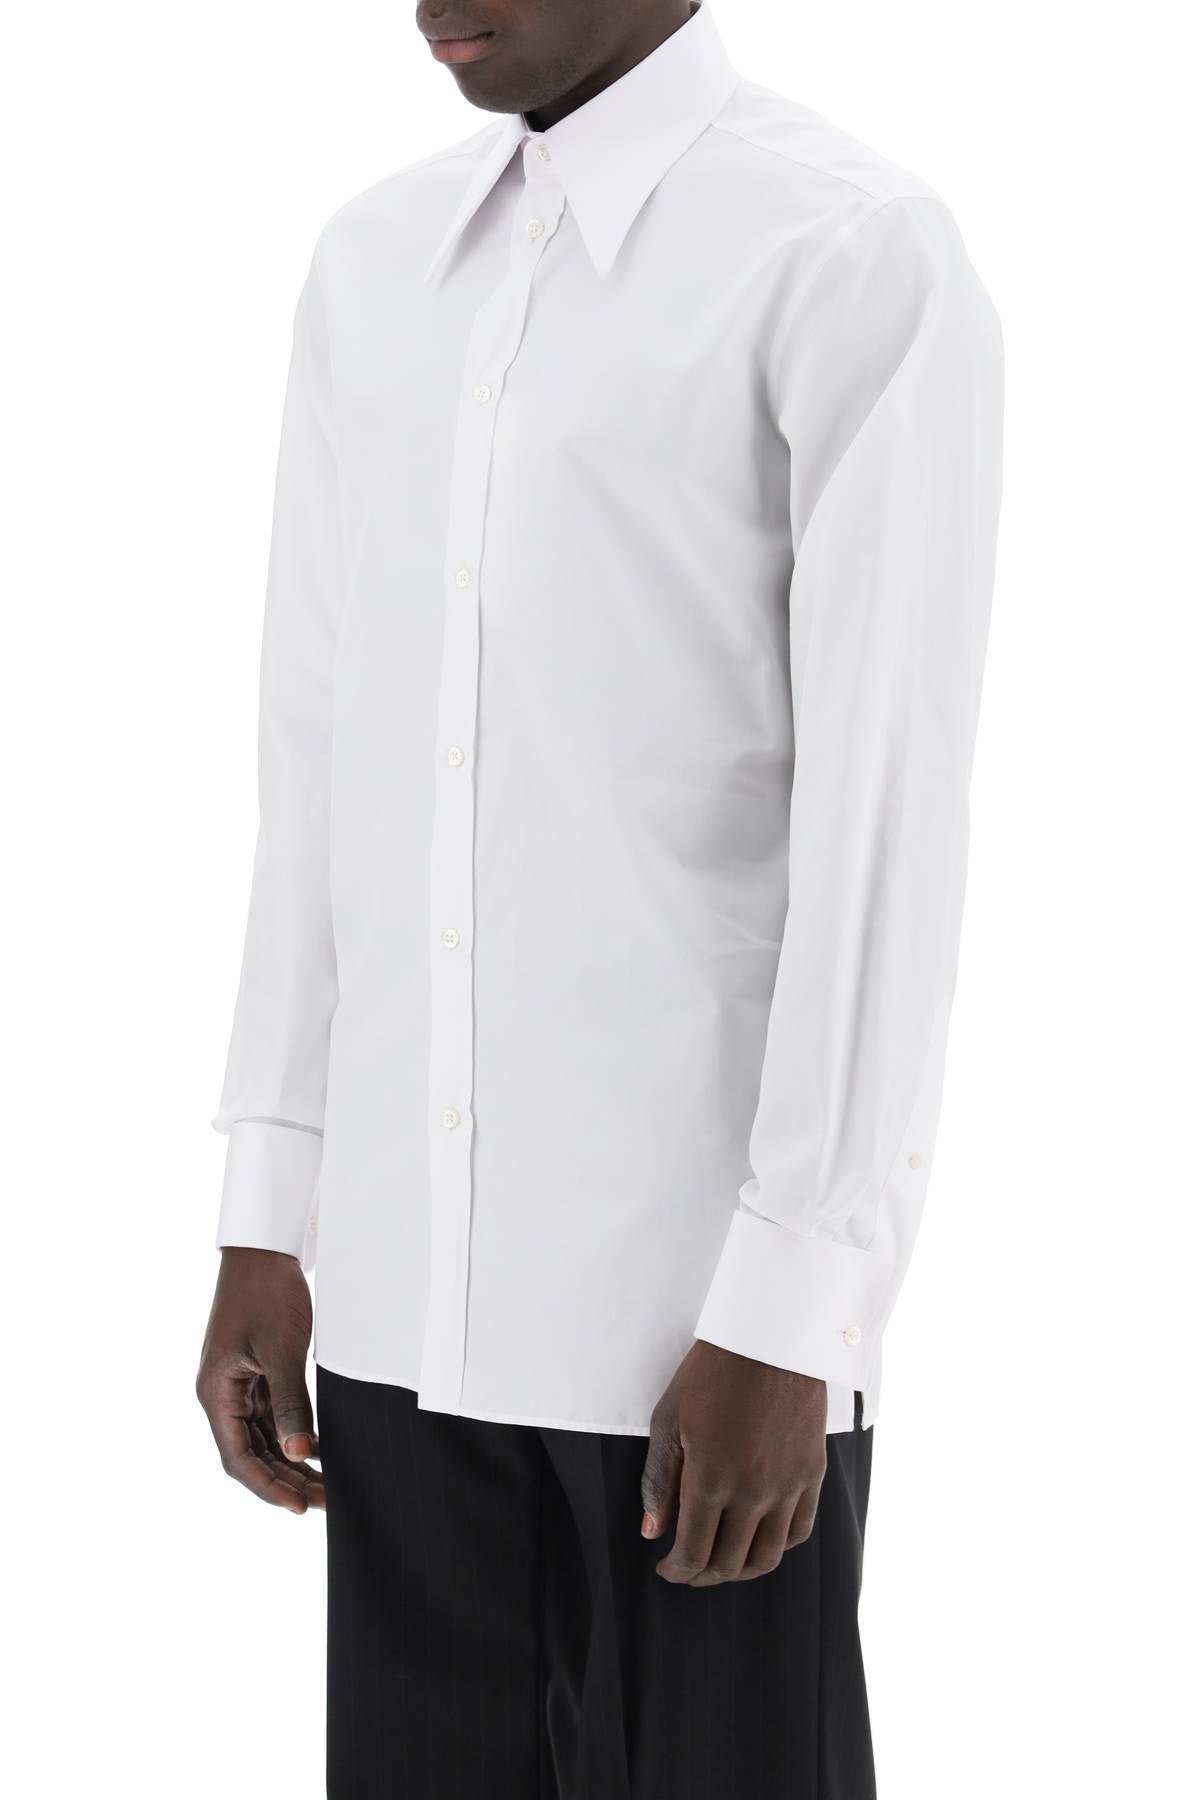 Maison margiela "shirt with pointed collar"-3